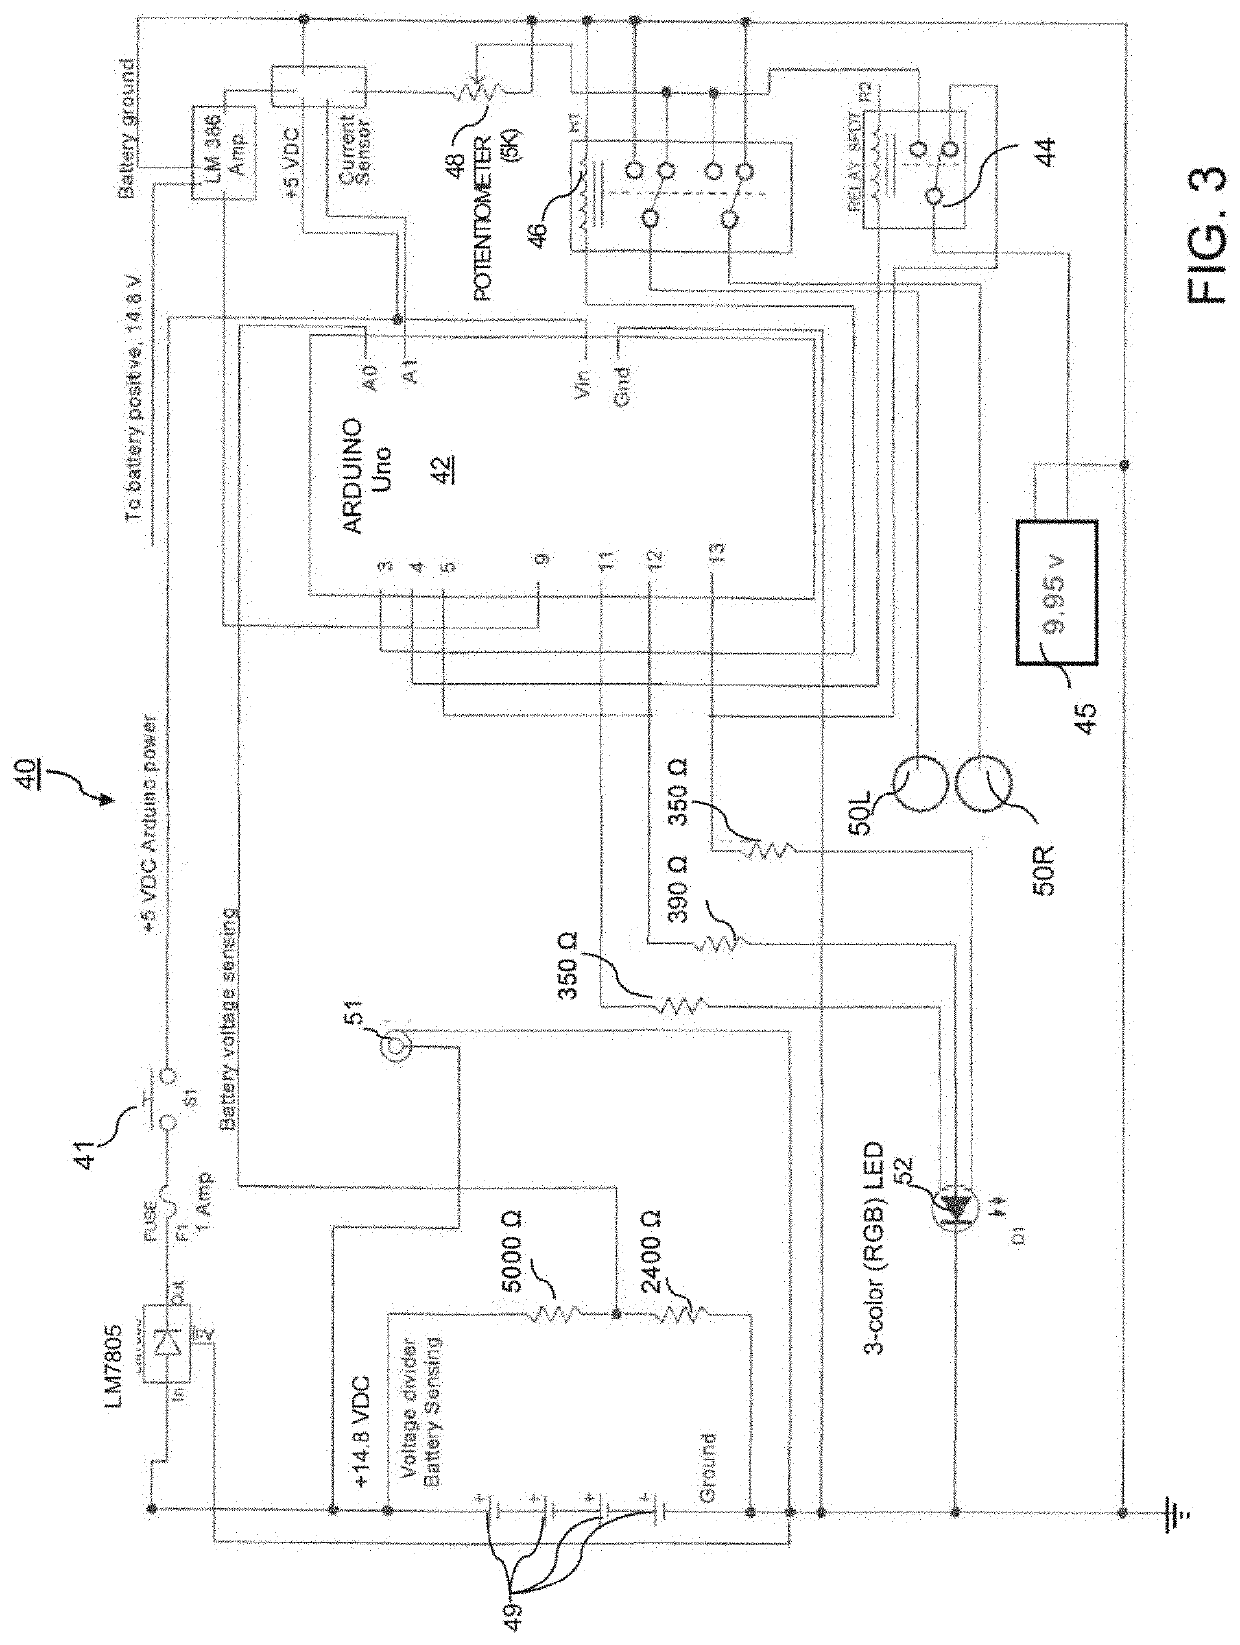 Systems, devices and methods for anxiety treatment using vestibular nerve stimulation